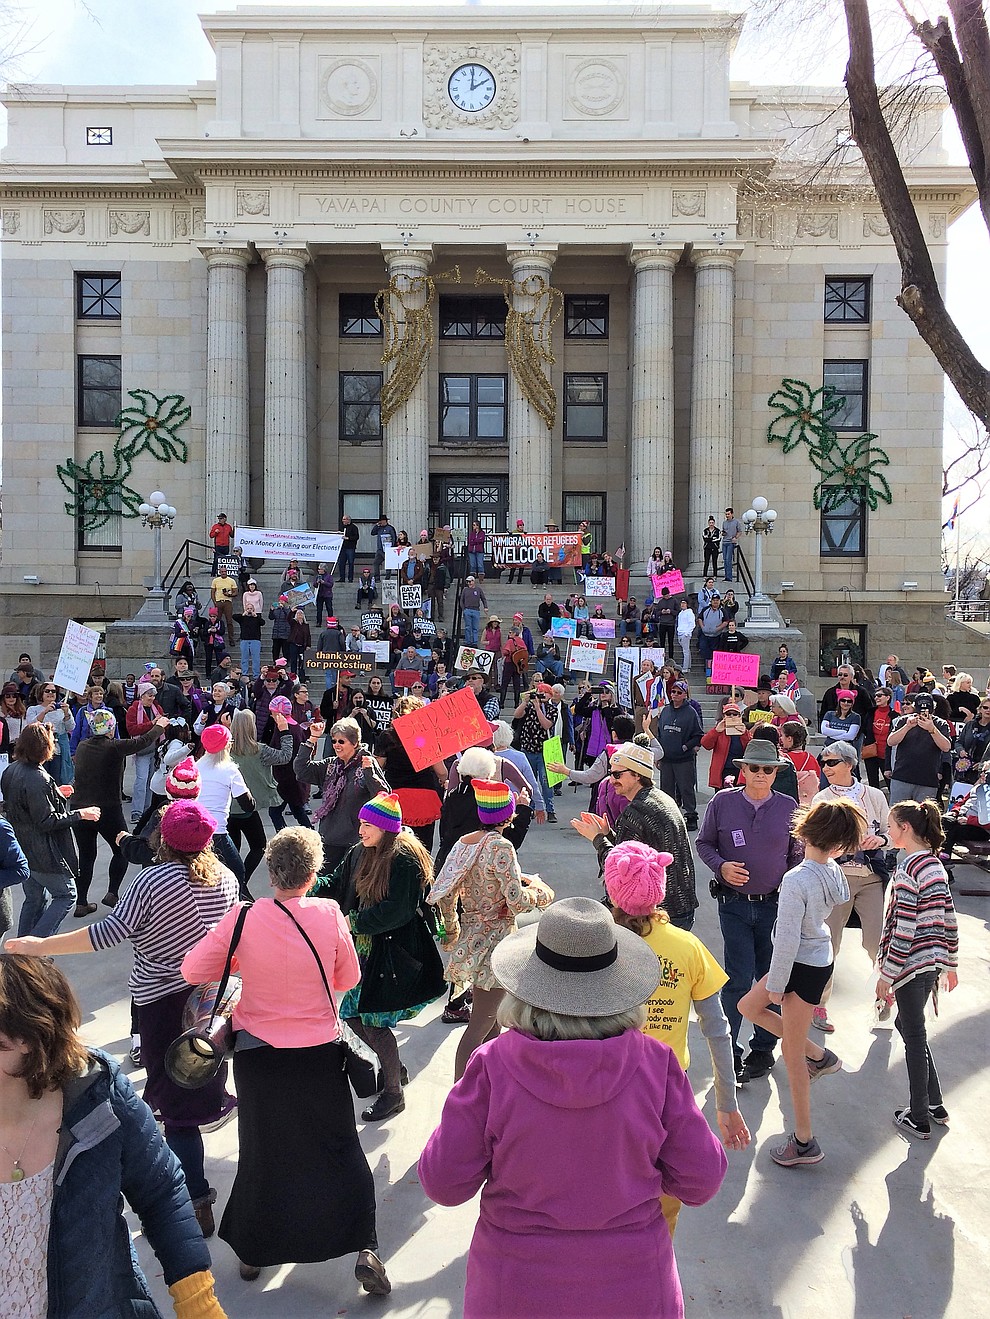 Participants perform a lively flash mob dance on the Yavapai County Courthouse during the Yavapai County Women March On event Jan. 19, 2019. (Sue Tone/Courier)